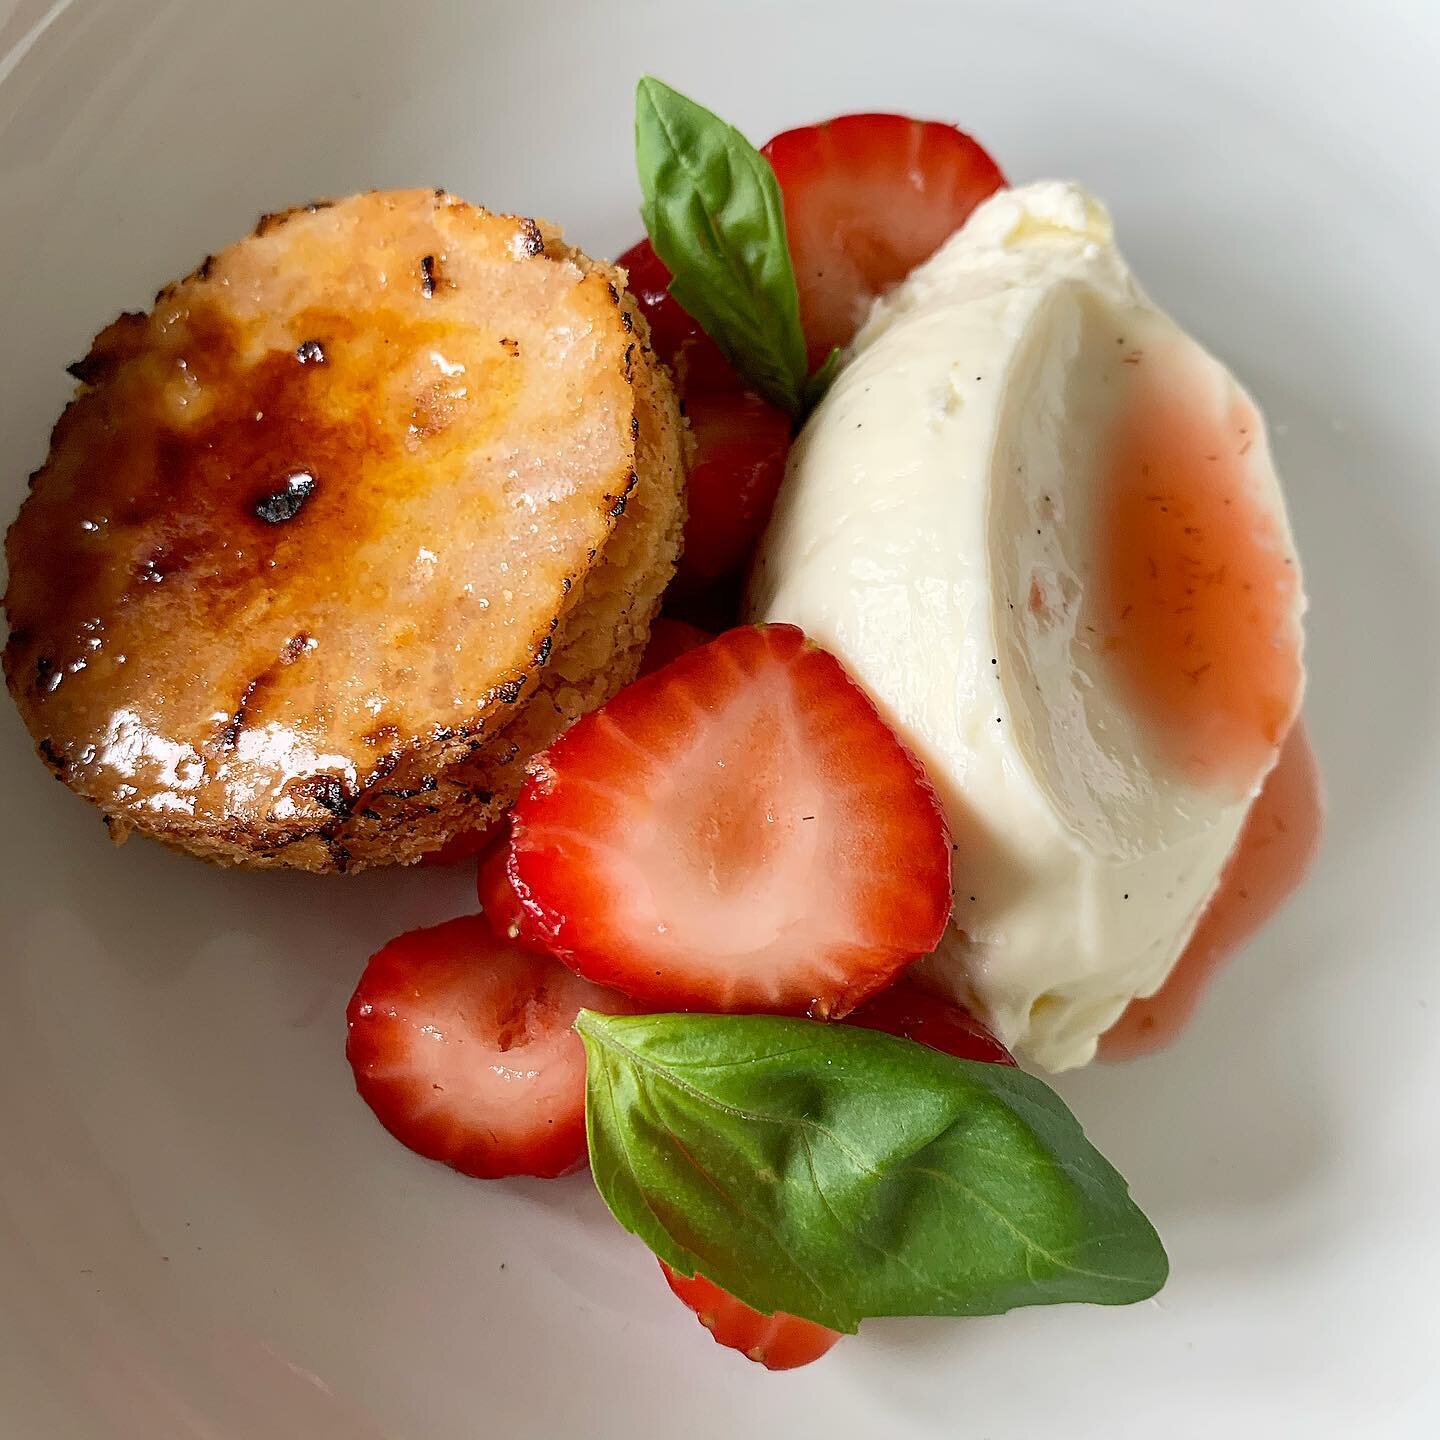 After accomplishing invert puff we hope you can take a moment to enjoy a bowl of the scraps jhuzzed up. Just like this. Caramelised invert puff disc, mascarpone cream, strawberries, basil. Love it! #puffschool #puffvoltwo